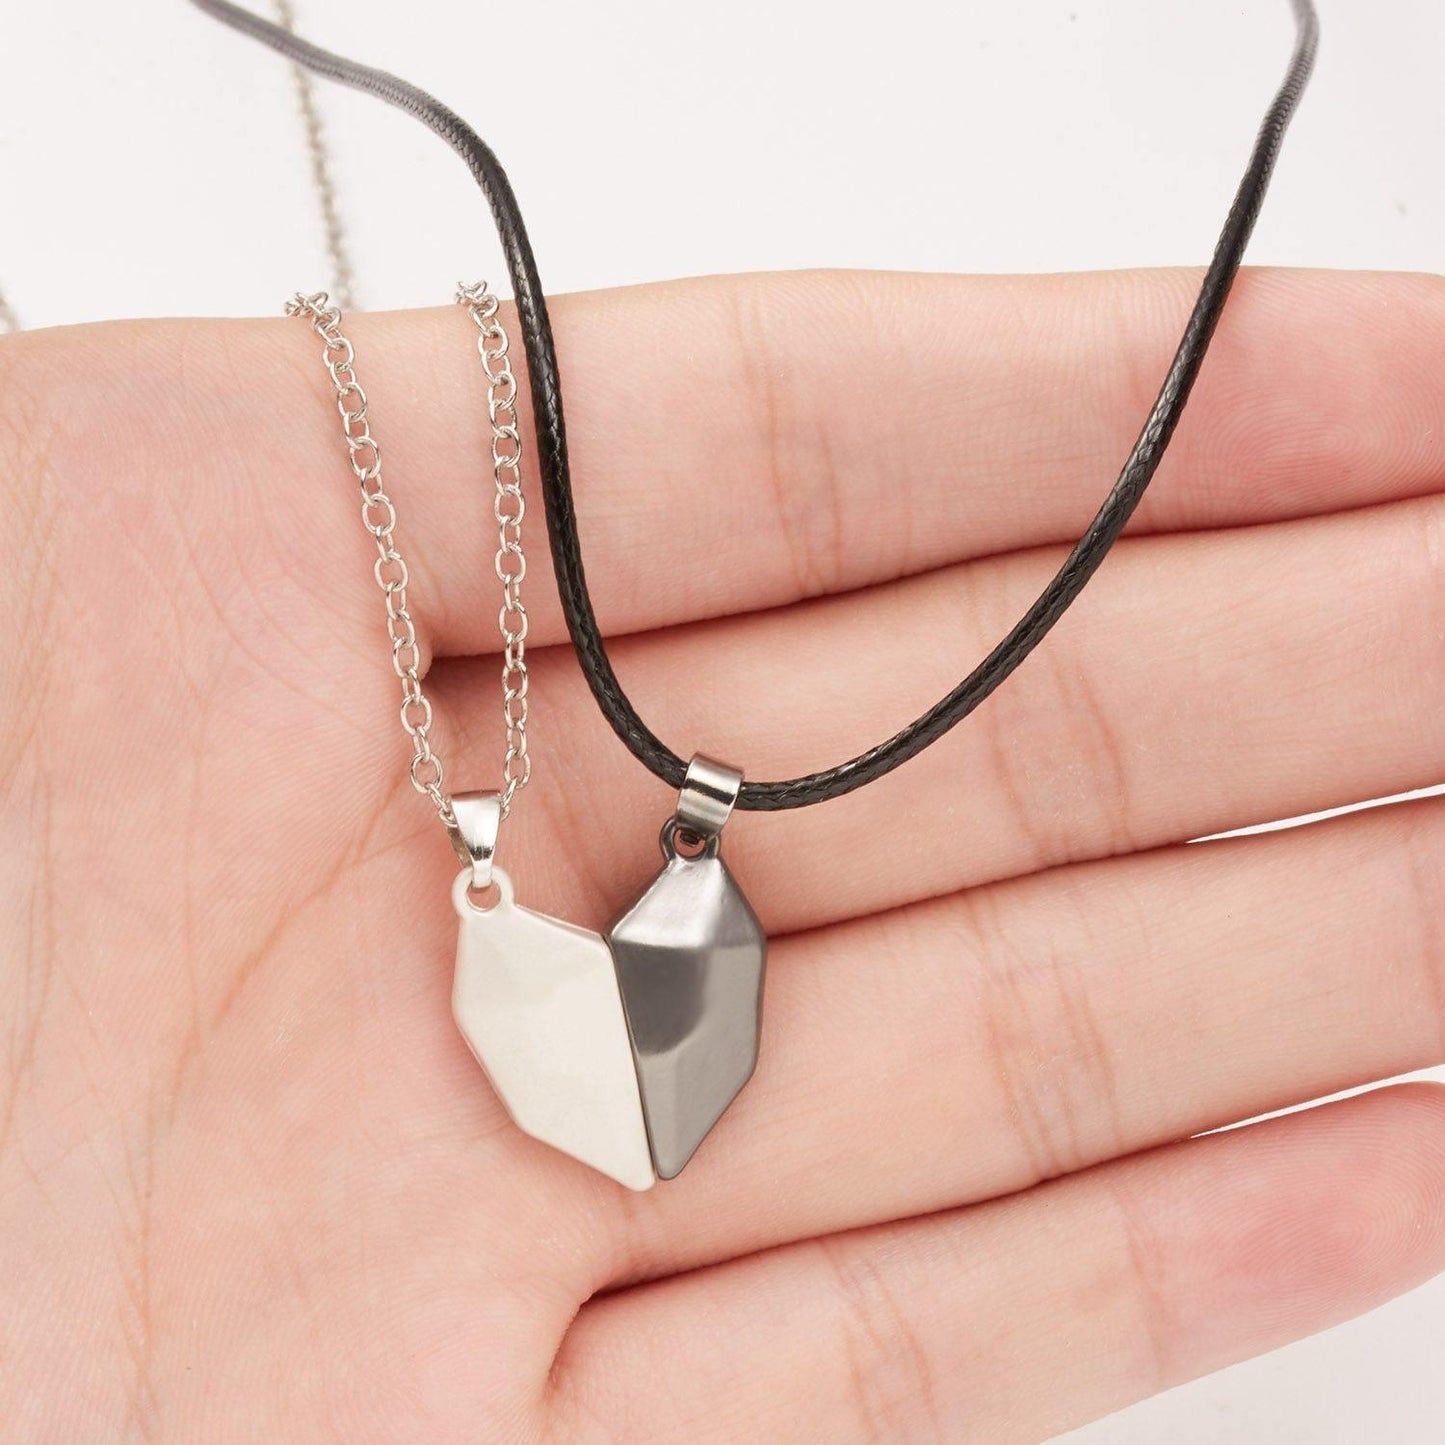 Couples Necklaces For You And The One You Love for Christmas 2023 | Couples Necklaces For You And The One You Love - undefined | Couple hugging pendant, Couple Necklace, Gift for Girlfriend, Girlfriend Gifts, girlfriend necklace, Magnetic Couple Necklace, to my girlfriend | From Hunny Life | hunnylife.com